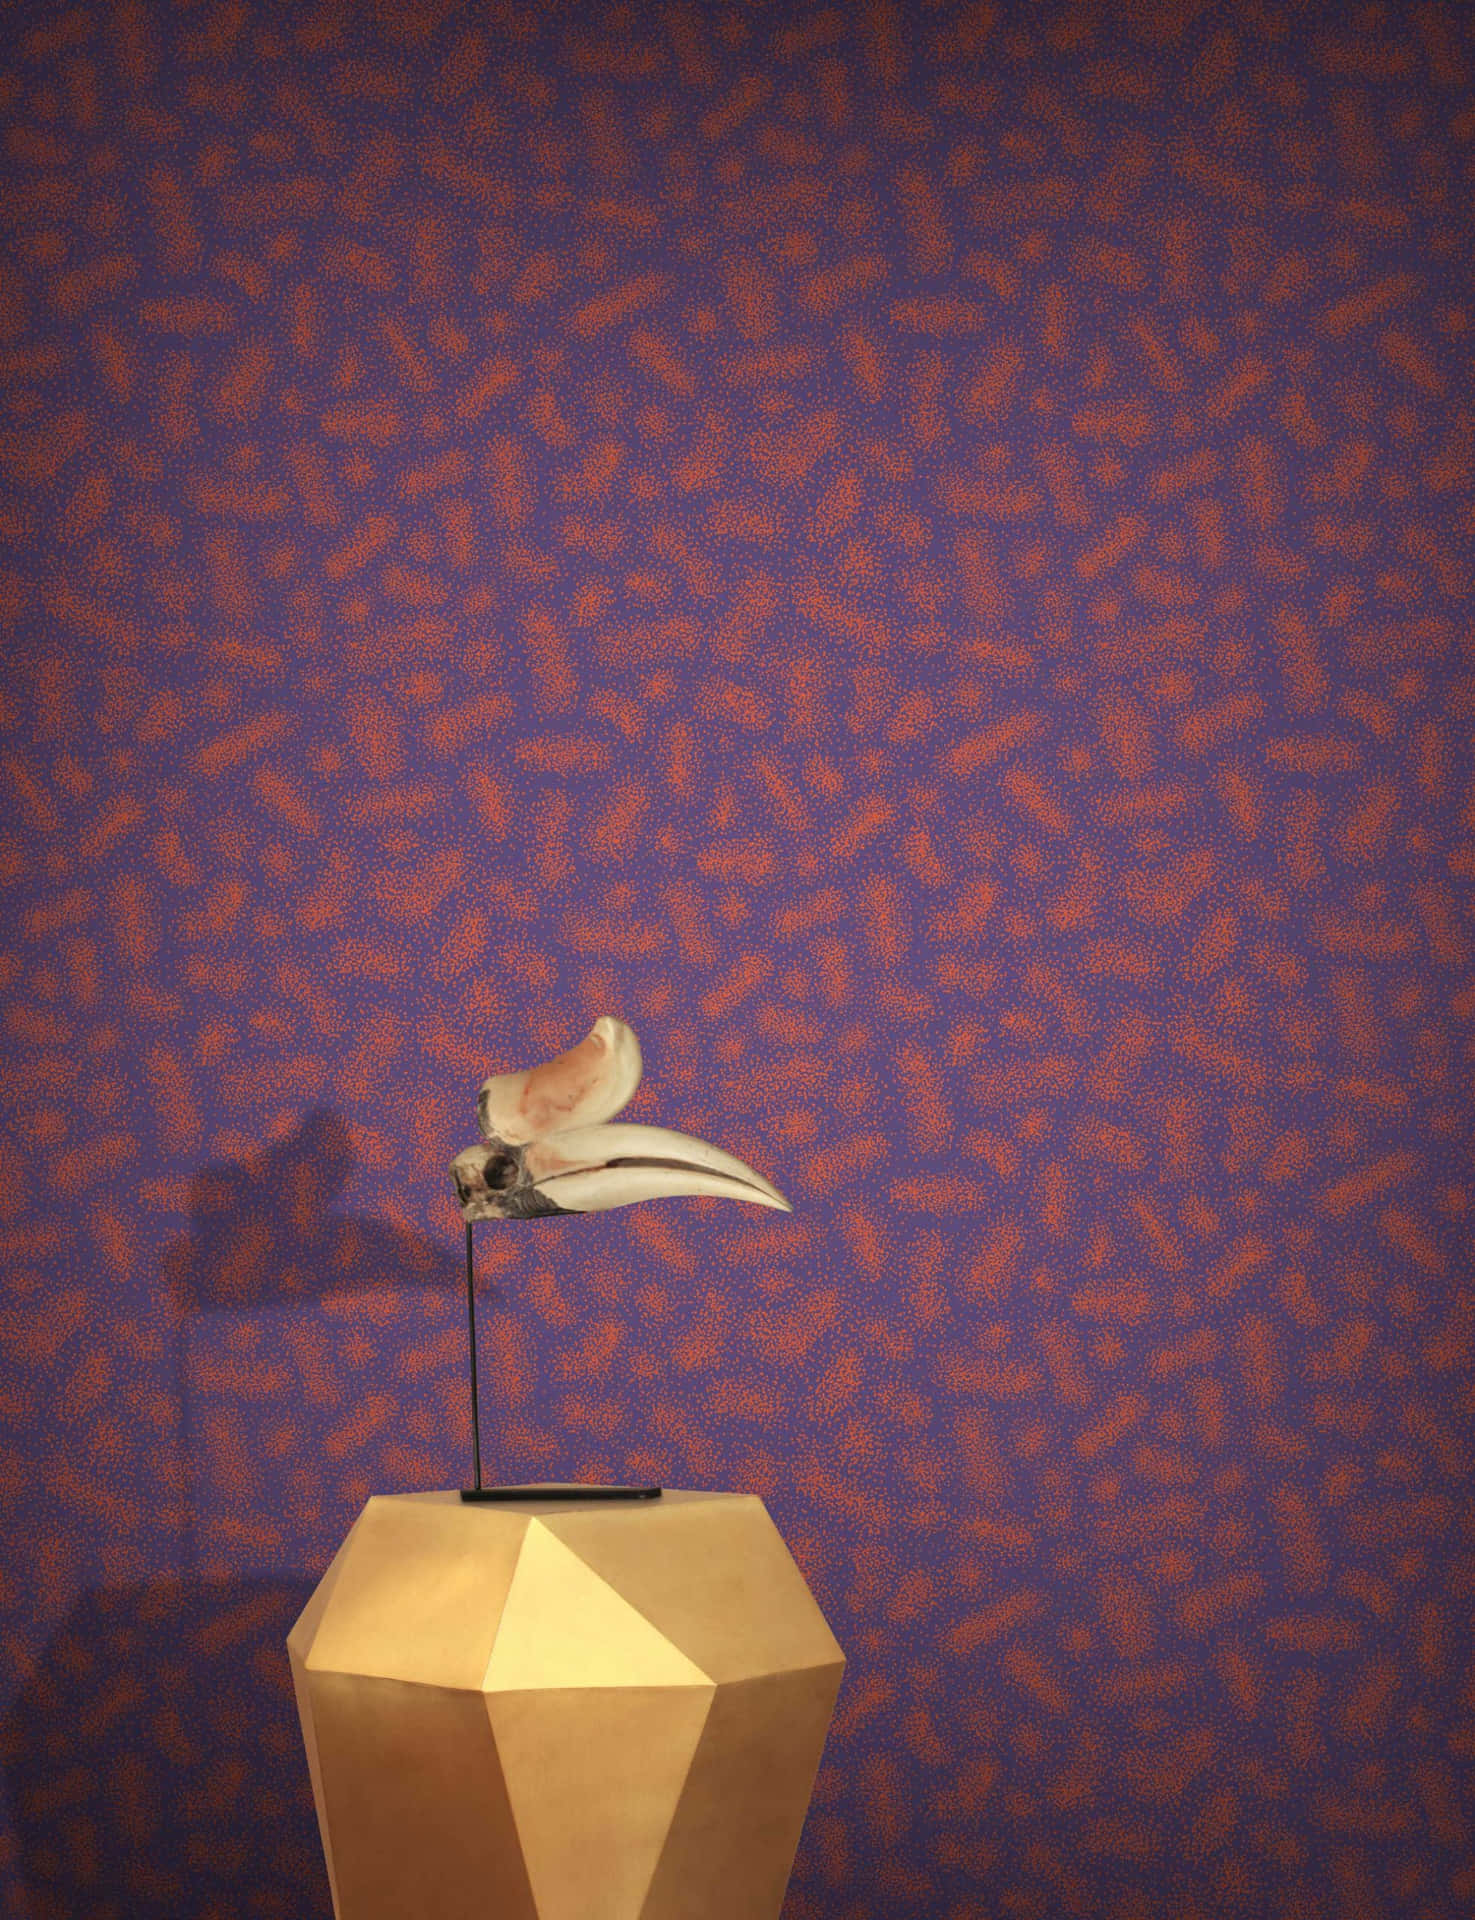 A Gold Bird Sitting On A Pedestal In Front Of A Purple Wall Wallpaper